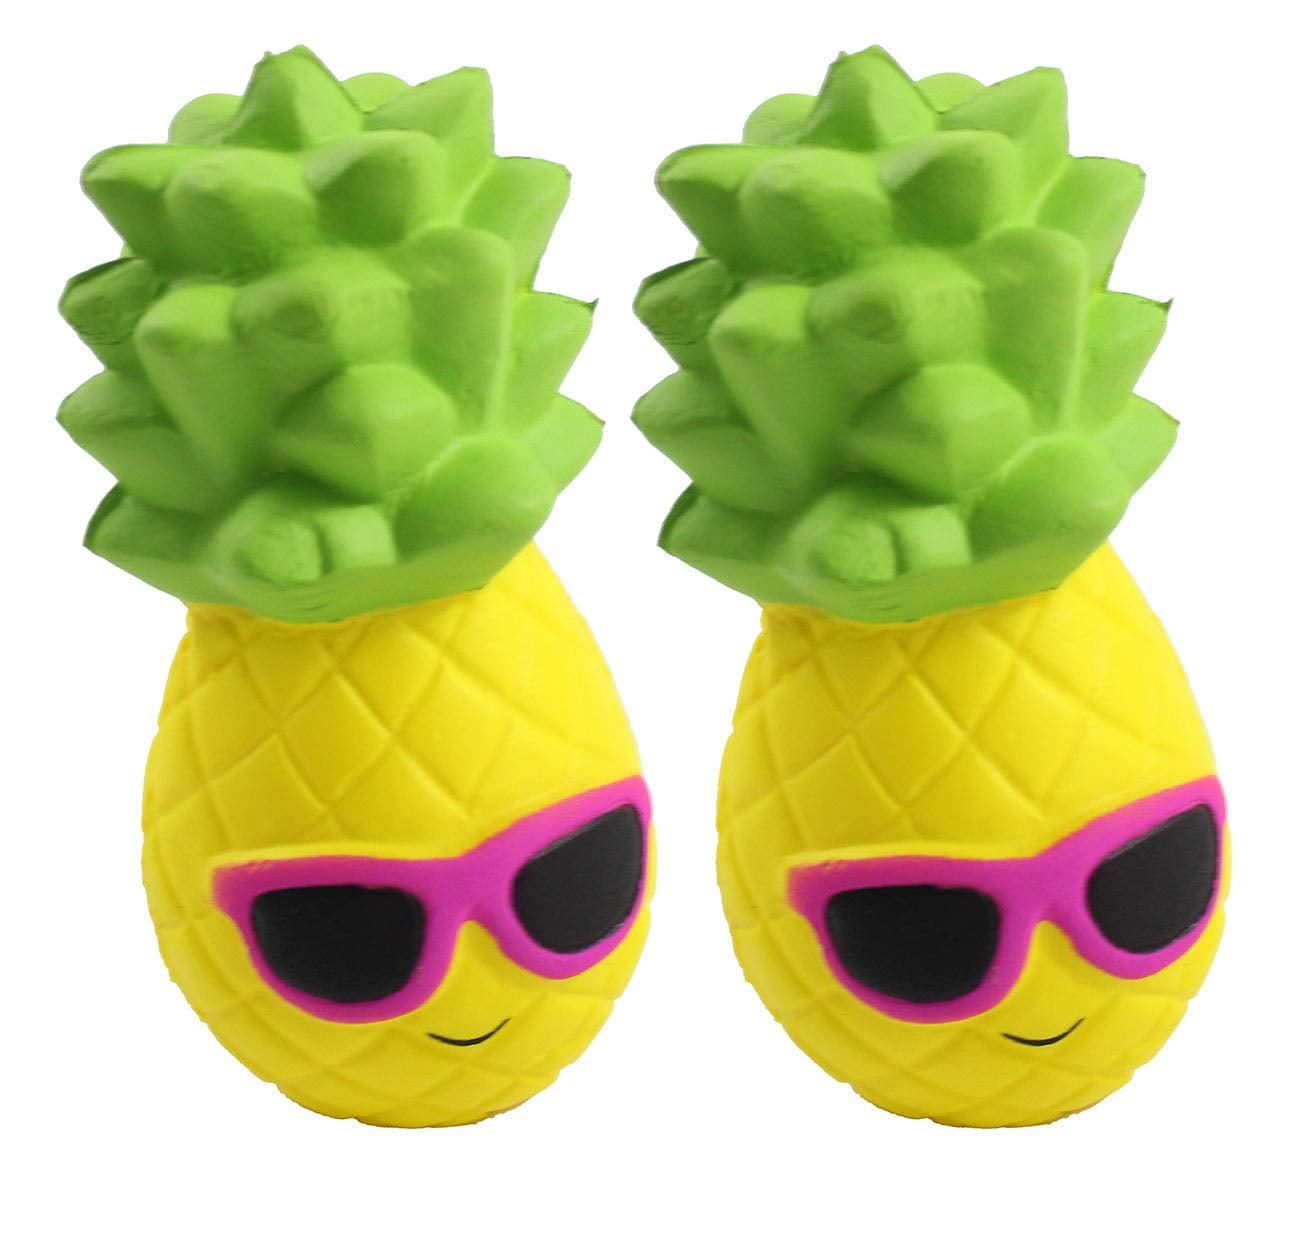 GMNP0di% Mini Squeeze Stress Relief Toys for Kids Adults Cute Pineapple Fruit Squishy Vent Toy Squeeze Grip Stress Reliever Home Decor Yellow Green